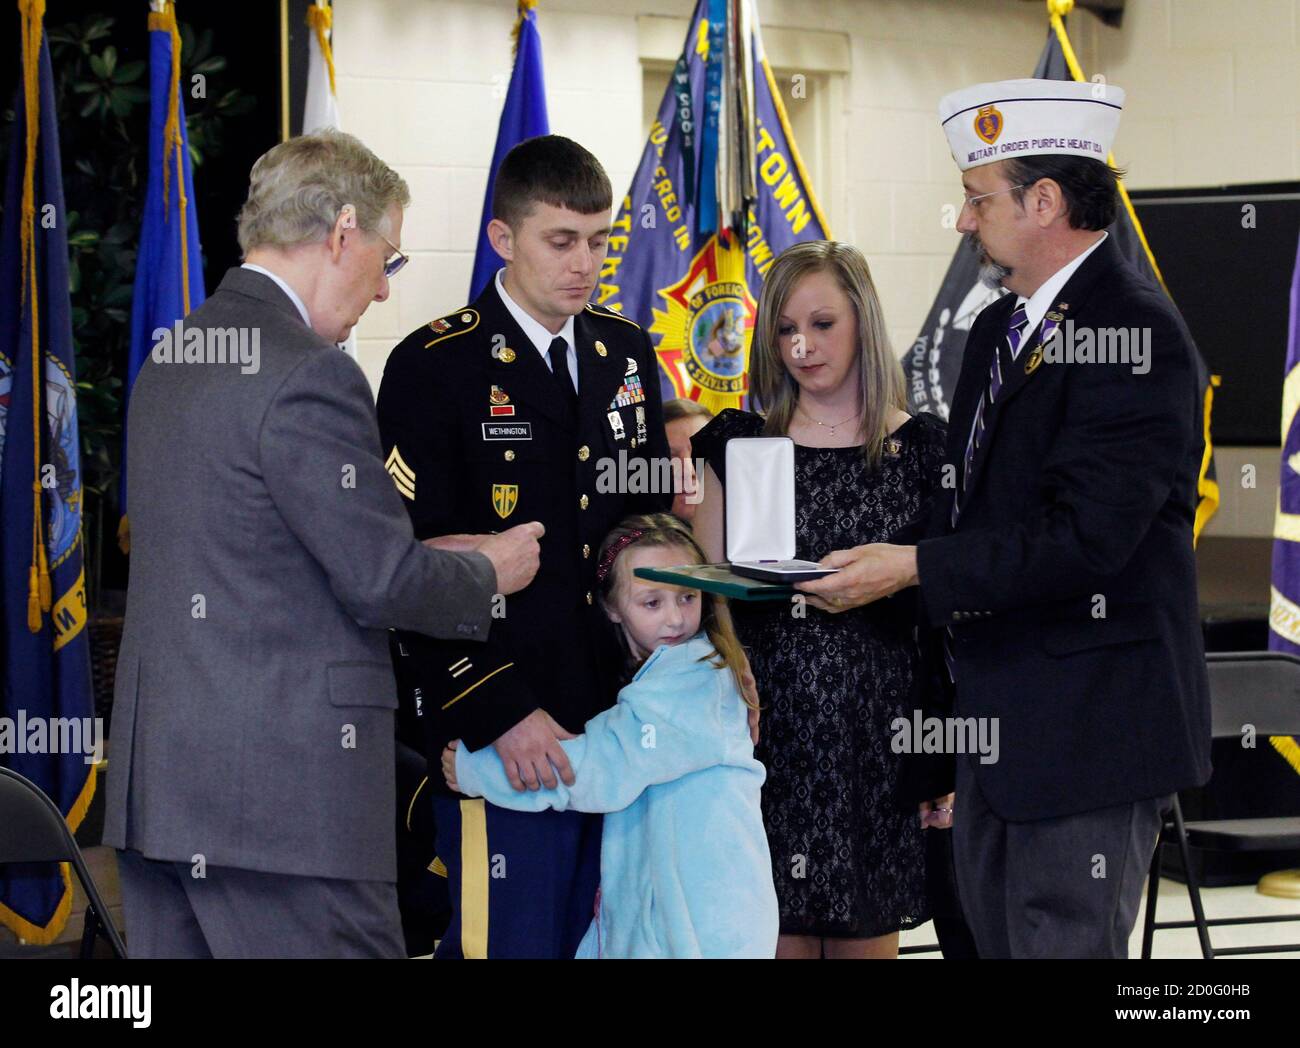 Sen. Mitch McConnell (R-KY) (L) presents Kentucky National Guard Sgt. Jesse Wethington (2nd L) of 623 Field Artillery with the Purple Heart medal as Wethington's wife Ashley and their daughter Hannah, 6, look on at the VFW Post 1170 in Louisville, Kentucky, April 5, 2014.       REUTERS/John Sommers II     (UNITED STATES - Tags: POLITICS MILITARY) Stock Photo